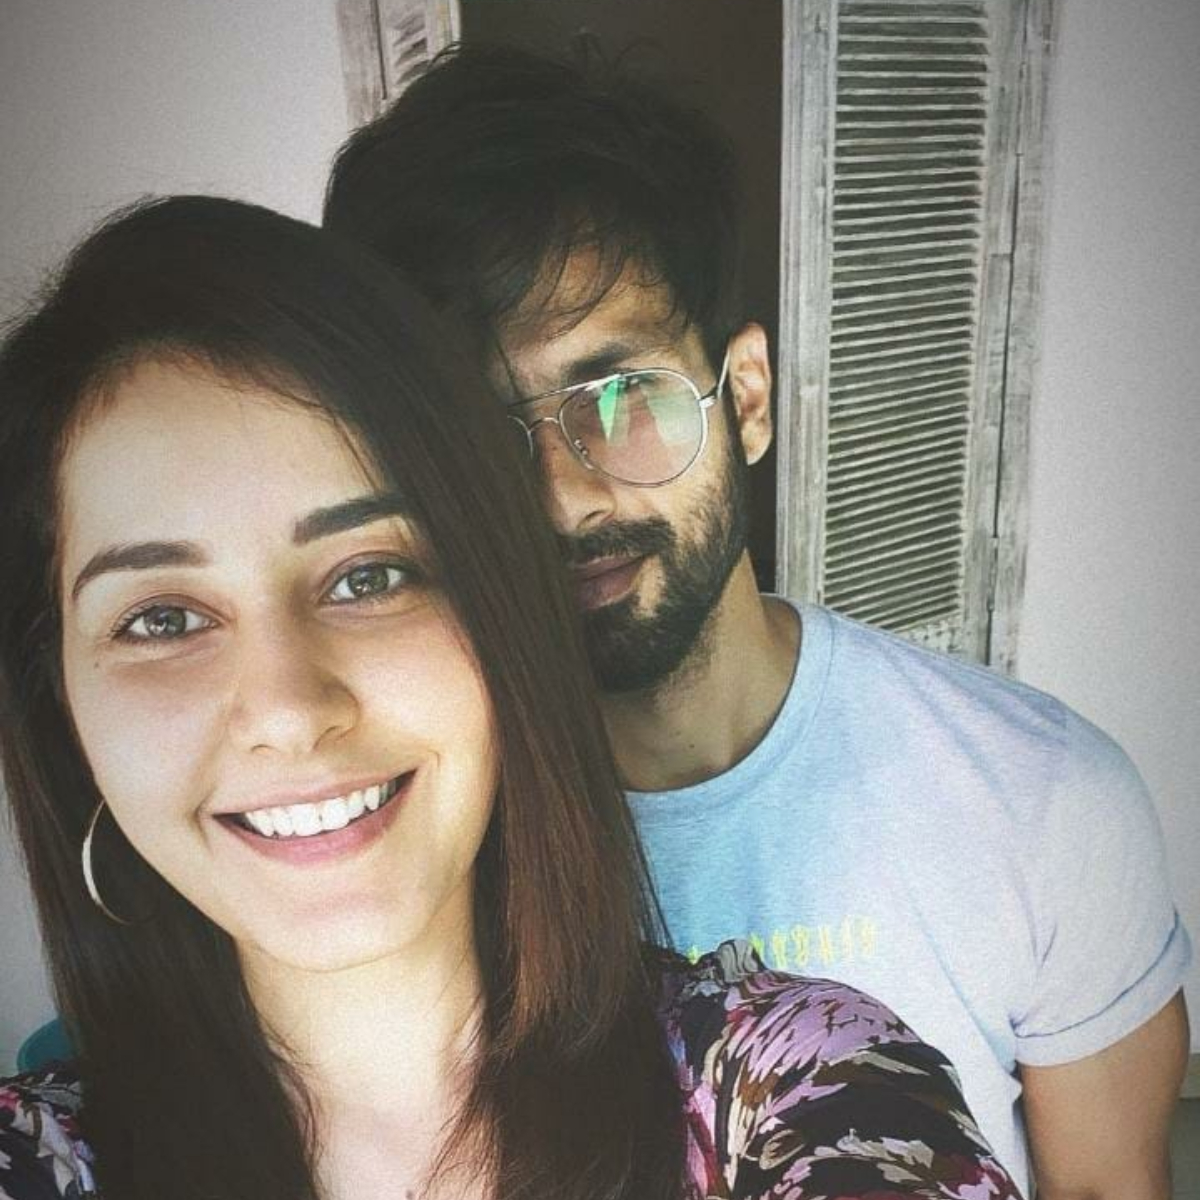 Shahid Kapoor hides behind Raashi Khanna as he welcomes her to Raj & DK's series; She responds with a query